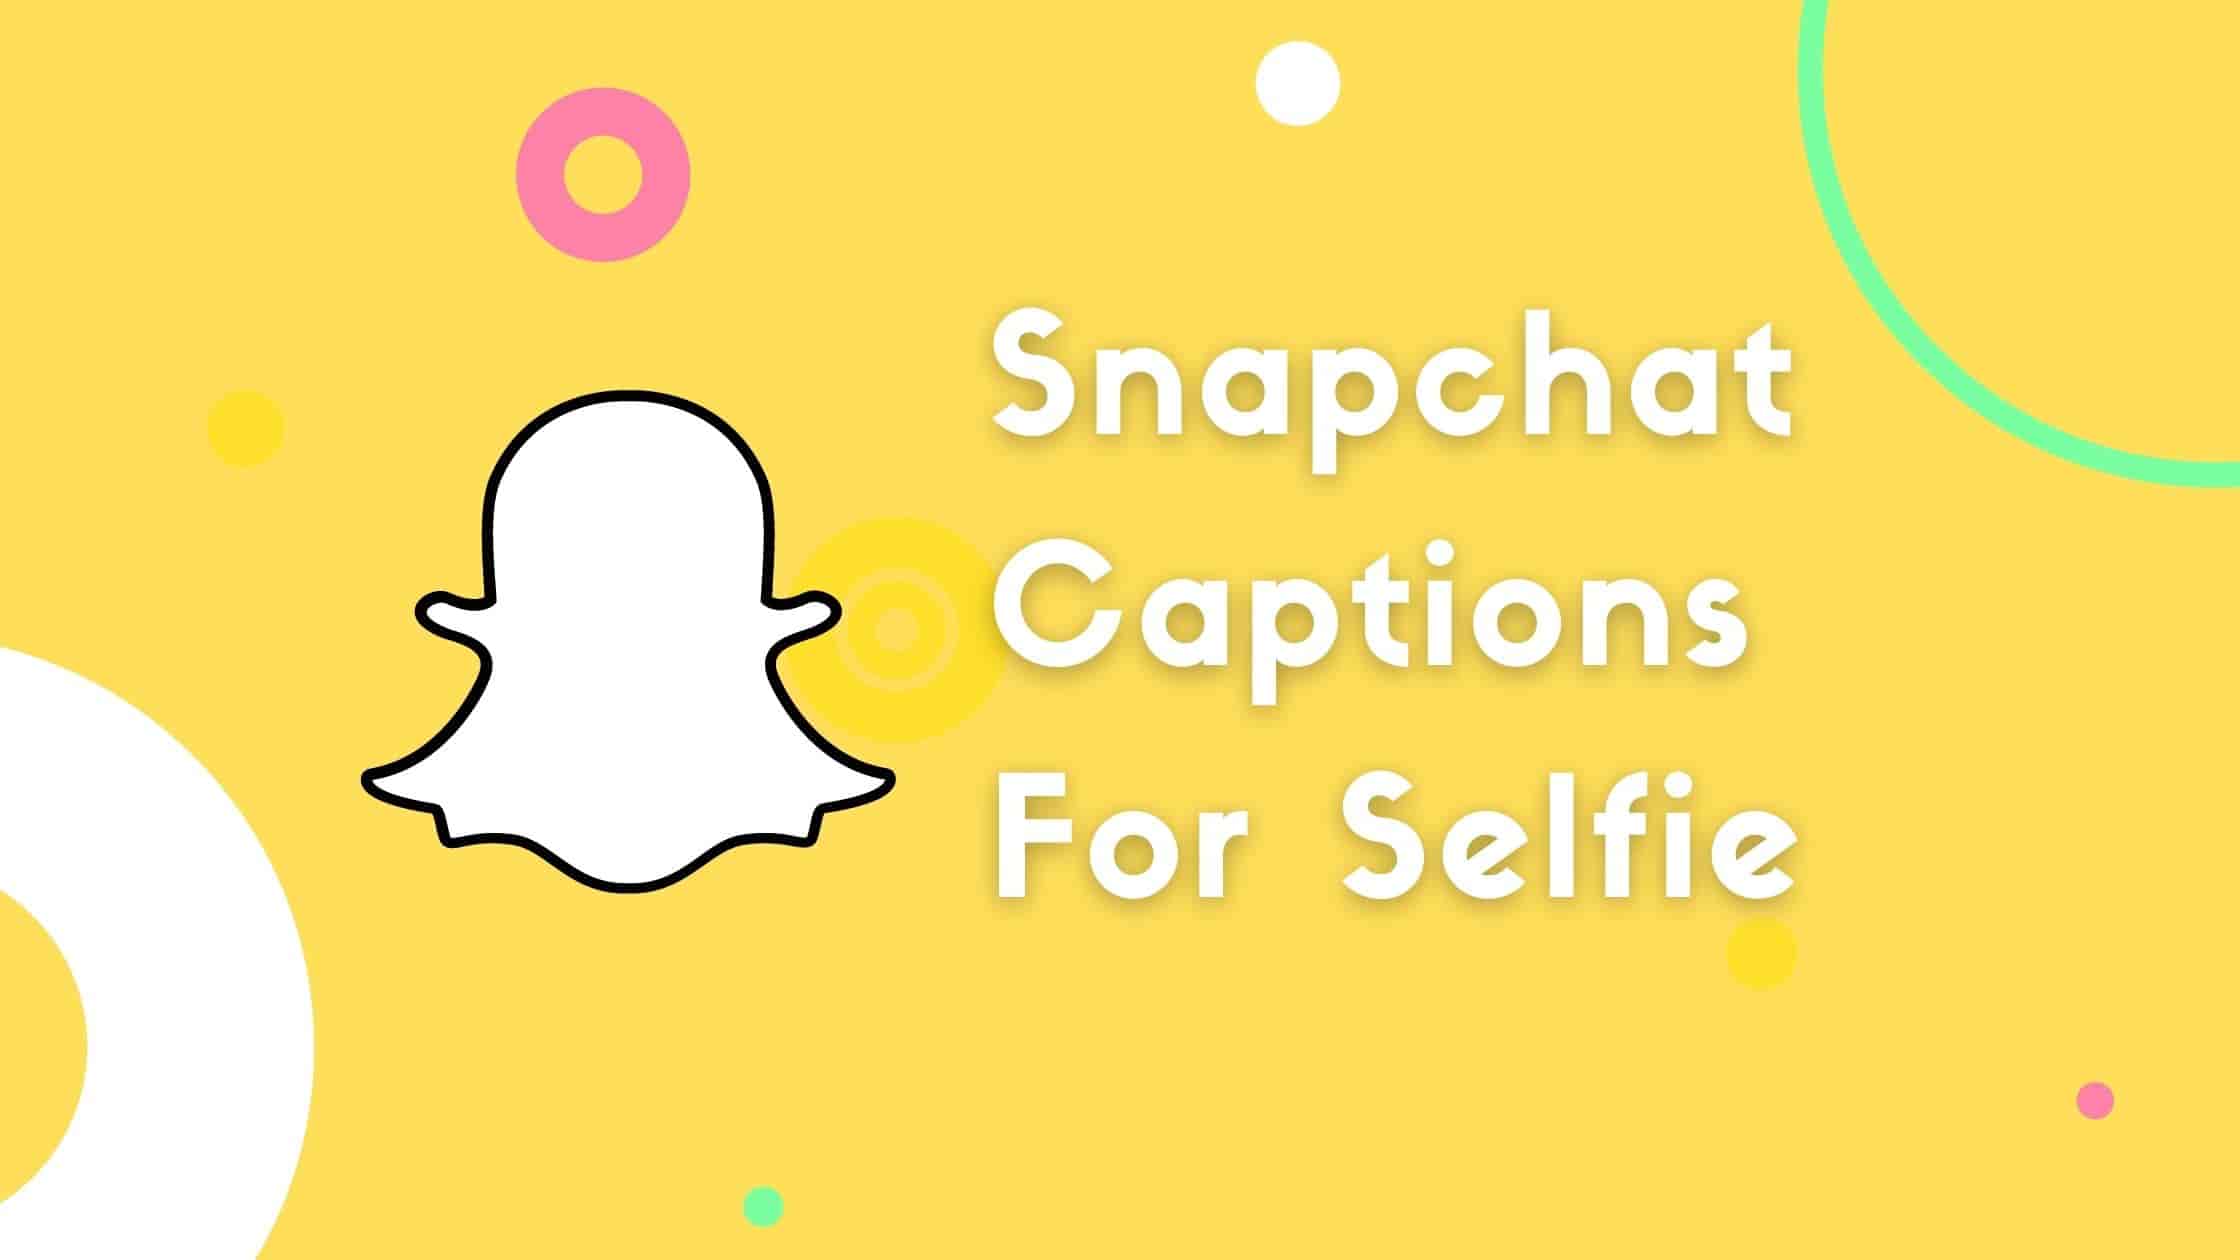 250+ Best Snapchat Captions And Quotes For Selfies